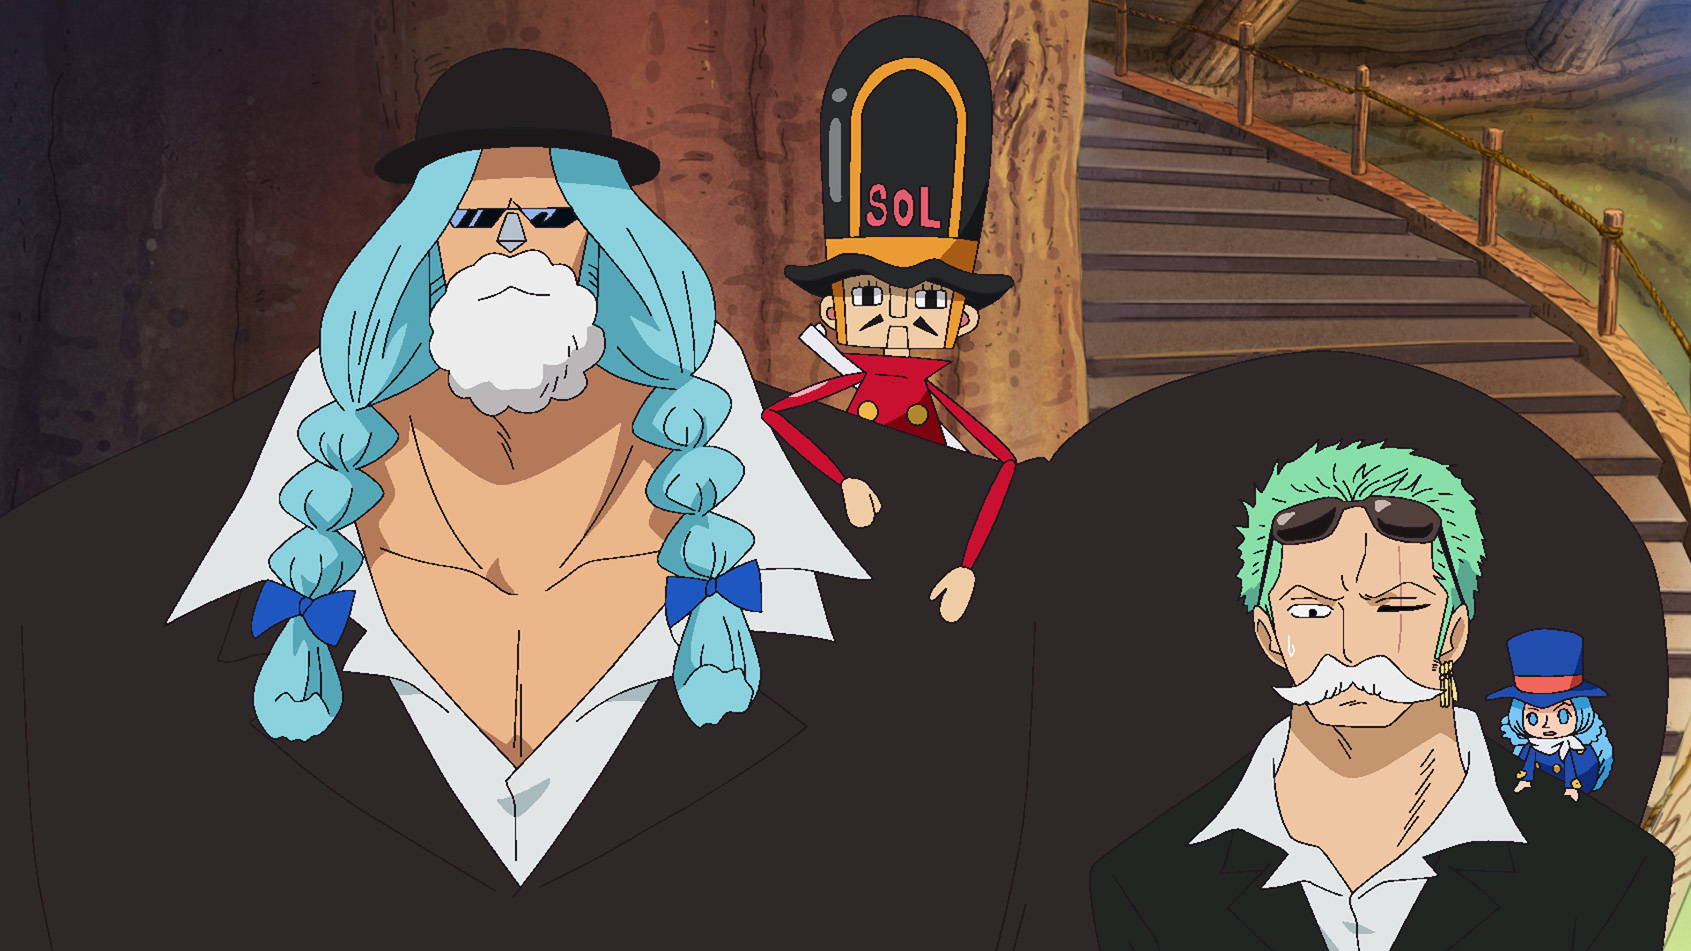 One Piece Season 11 Episode 631 Full Of Enthusiasm The Corrida Colosseum Uncut English Video Player Is Loading Play Video Loaded 0 Marathon Lights Language English Language Japanese English Subtitles Subtitles Version Uncut Version